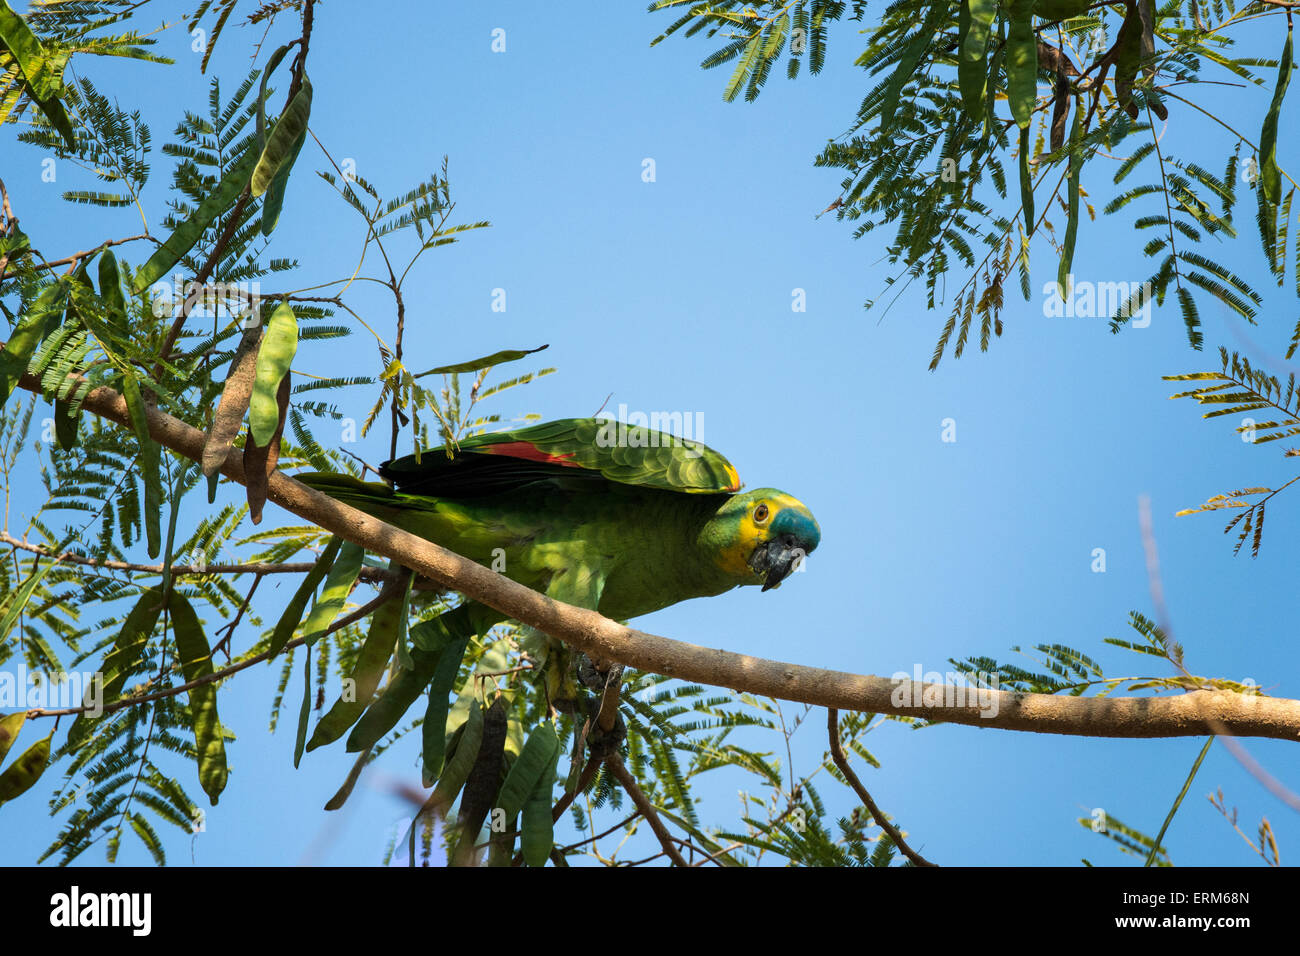 Wild Blue-fronted Amazon Parrot, Amazona aestiva, perched on the branch of a tree in the Pantanal, Mato Grosso, Brazil Stock Photo